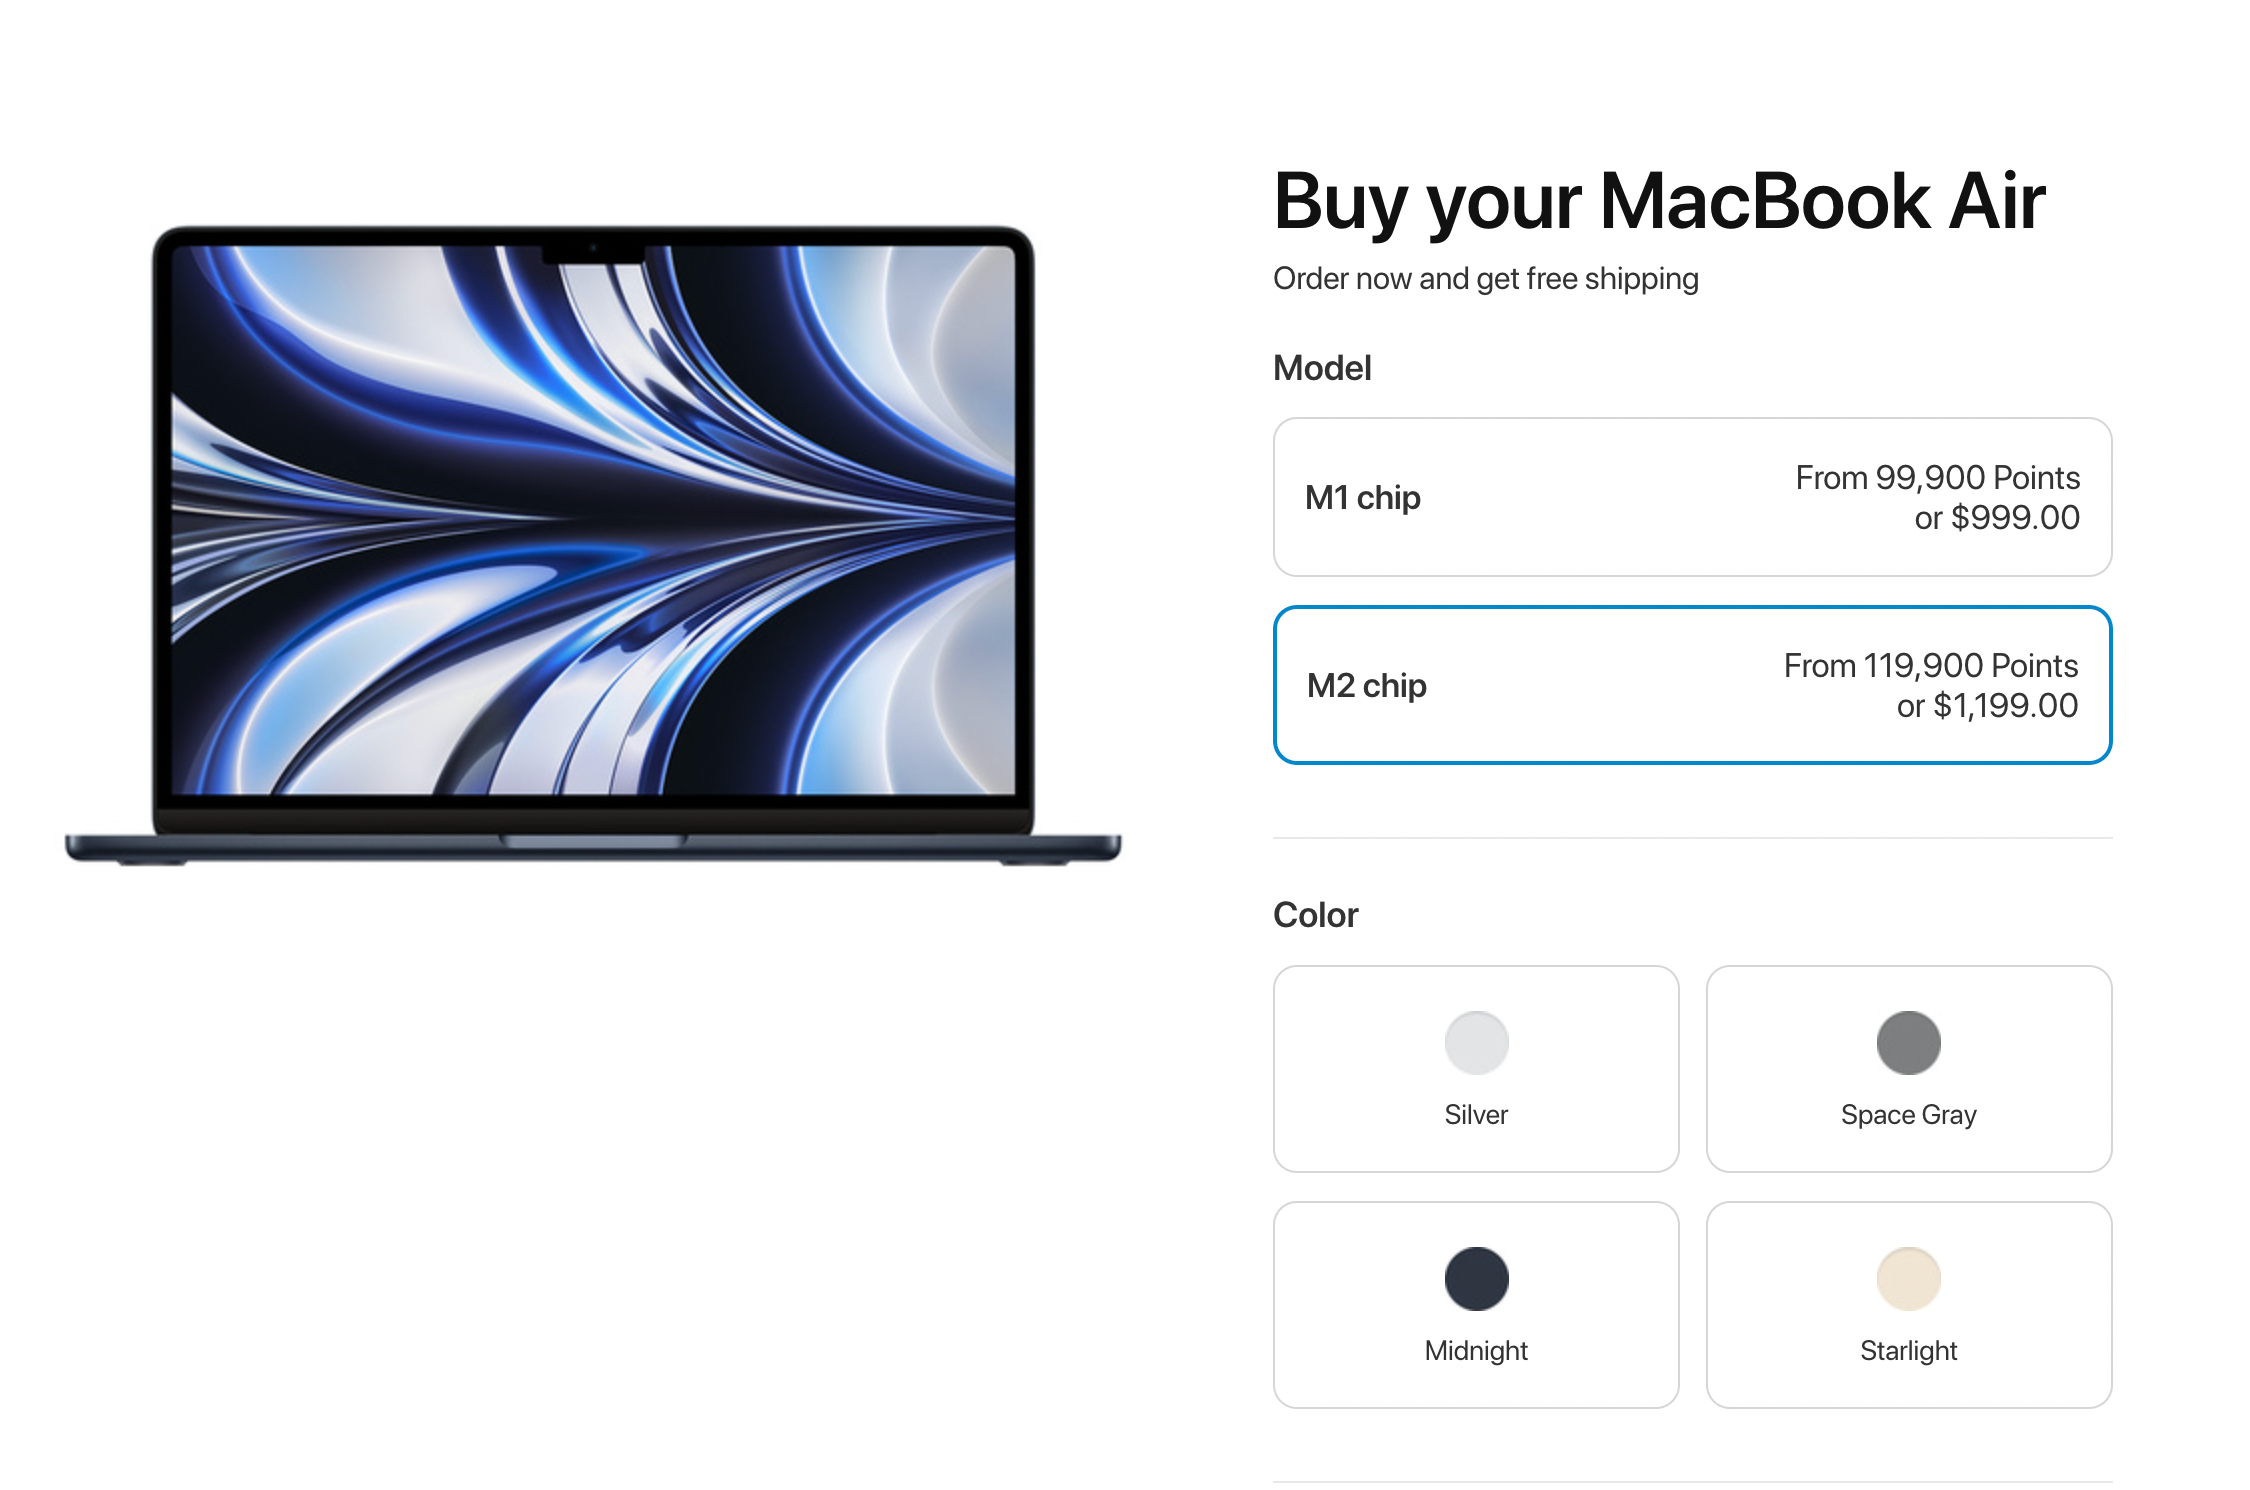 Value of Chase points buying from Apple.